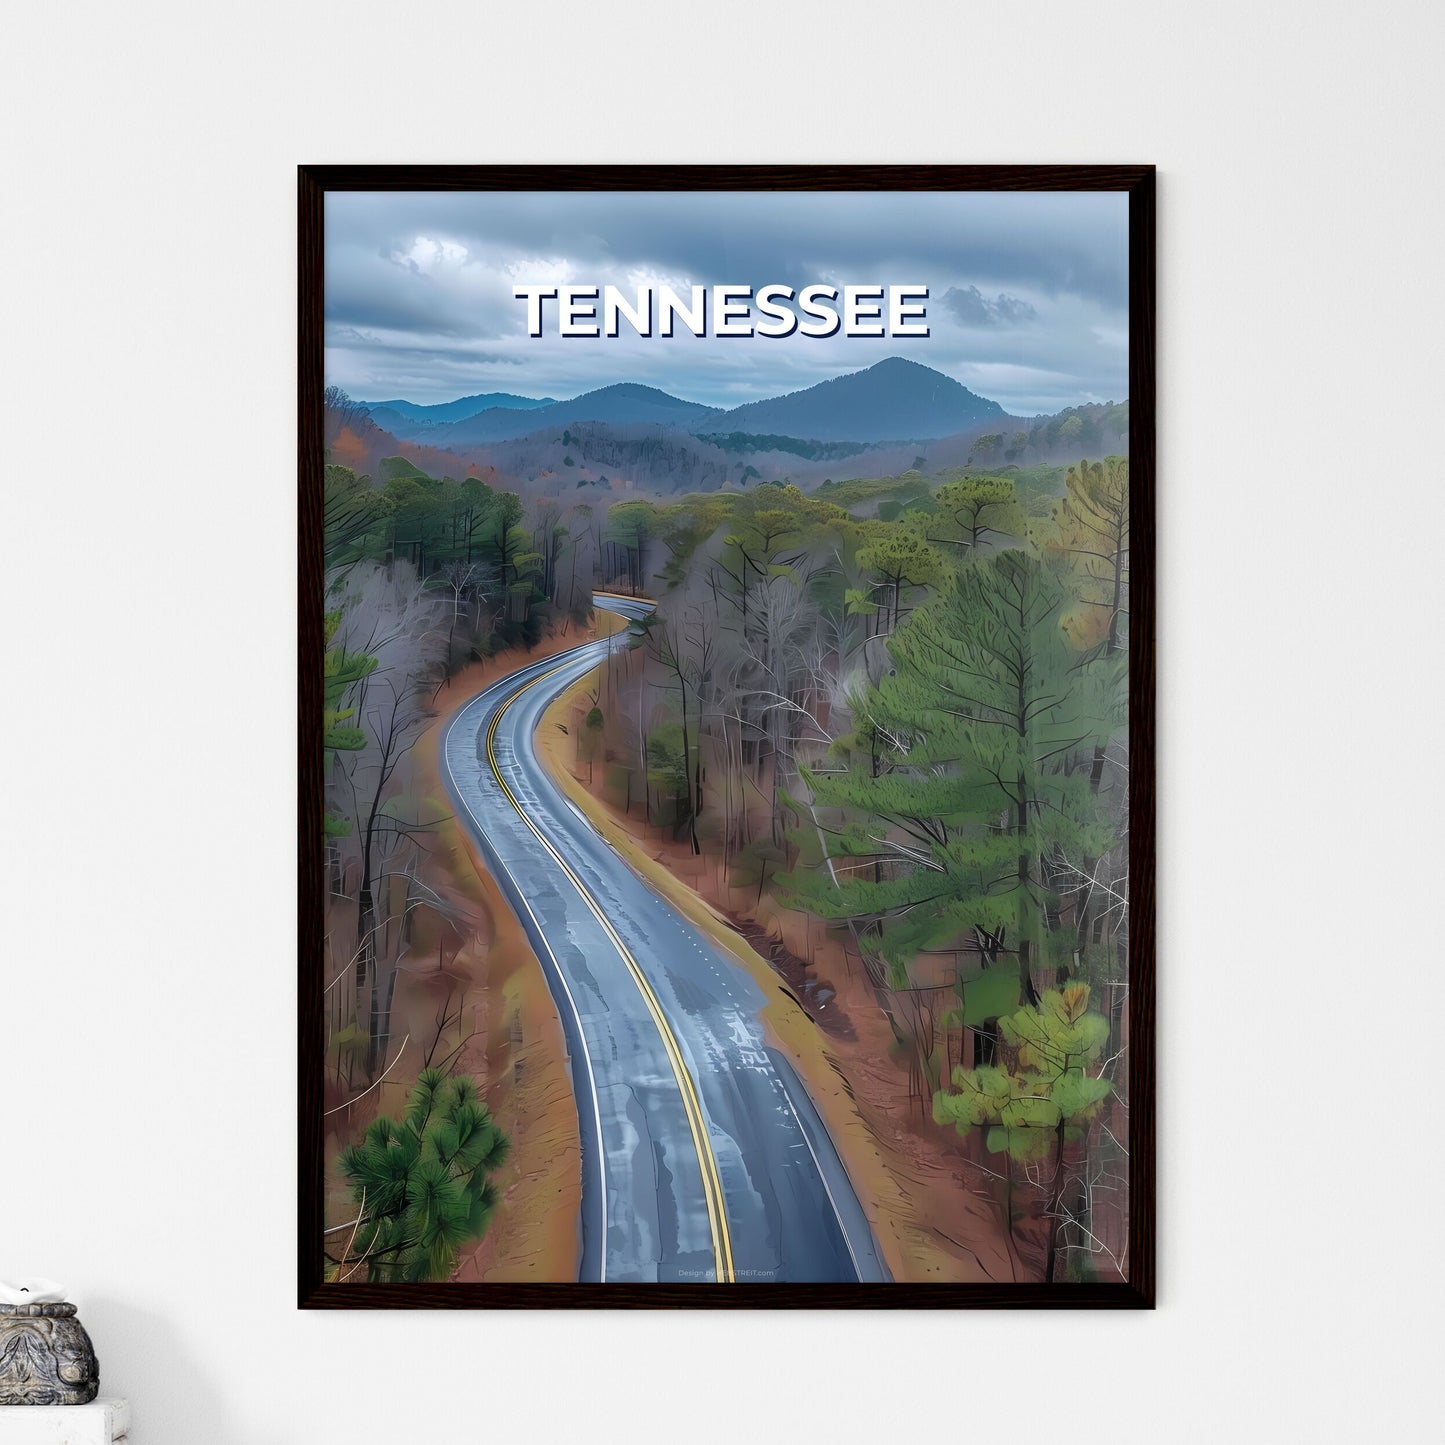 Artful Forest Road Painting Depicting the Beauty of Tennessee, USA